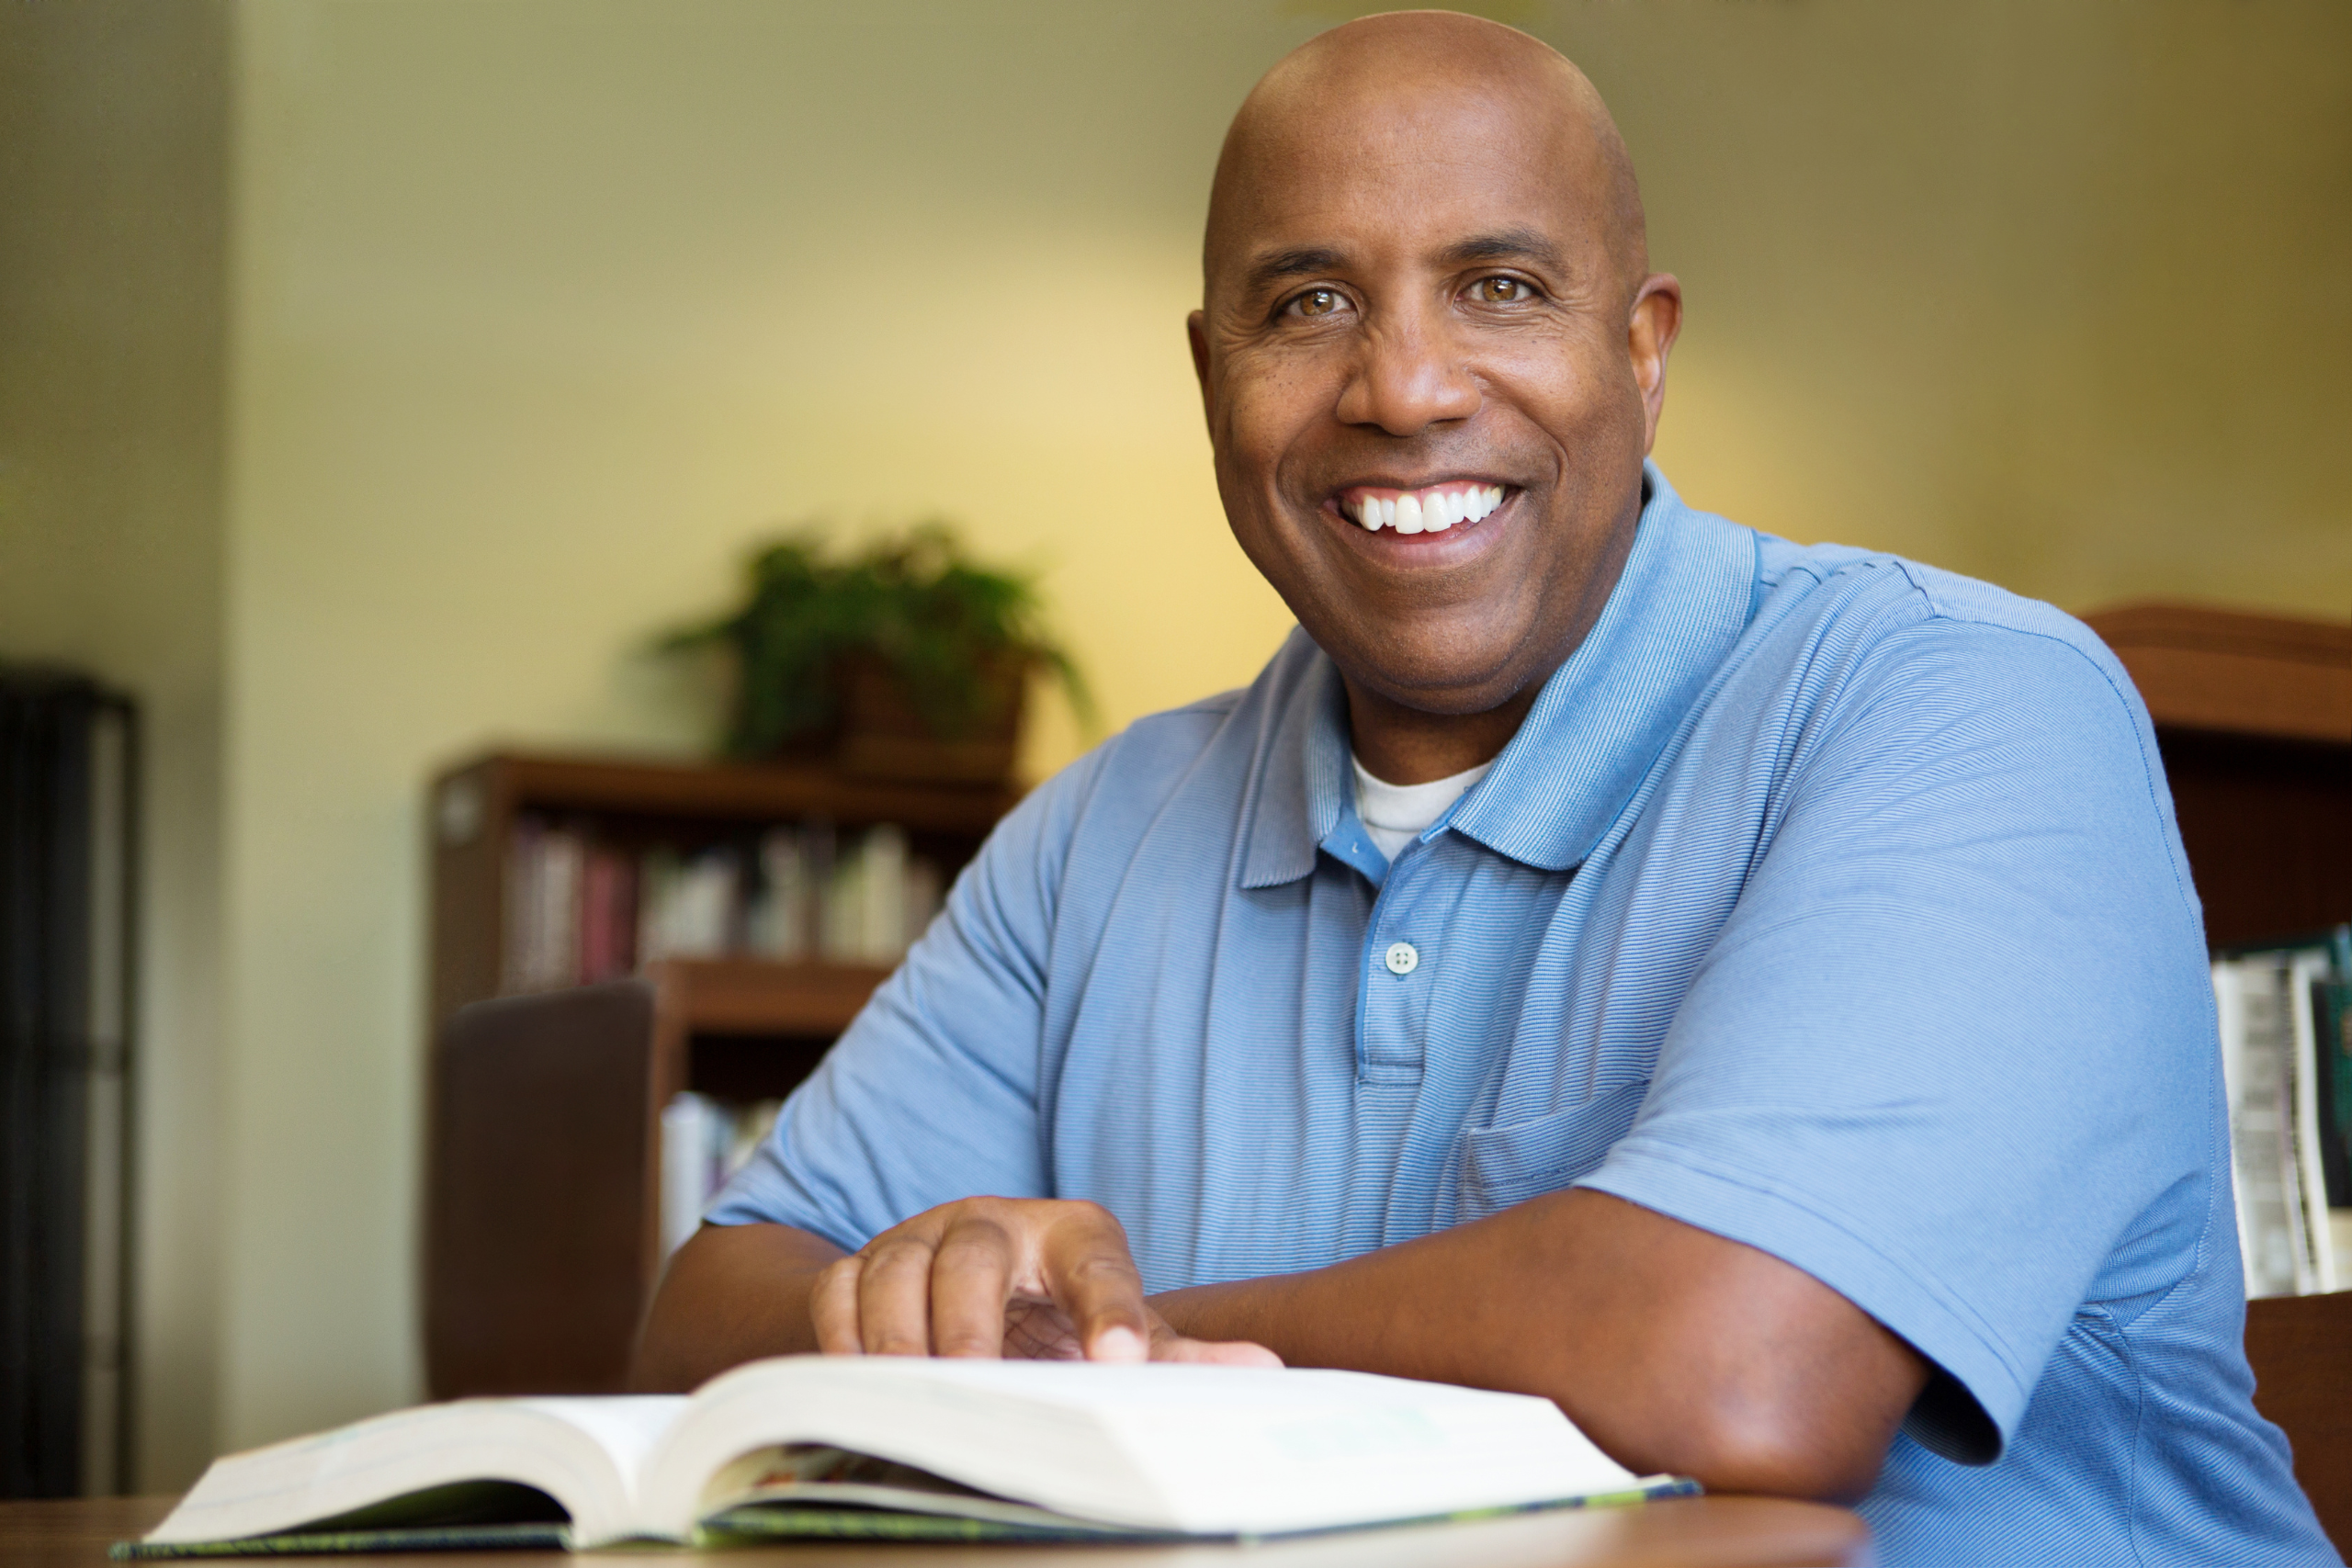 A photo of an adult man reading a book and smiling.